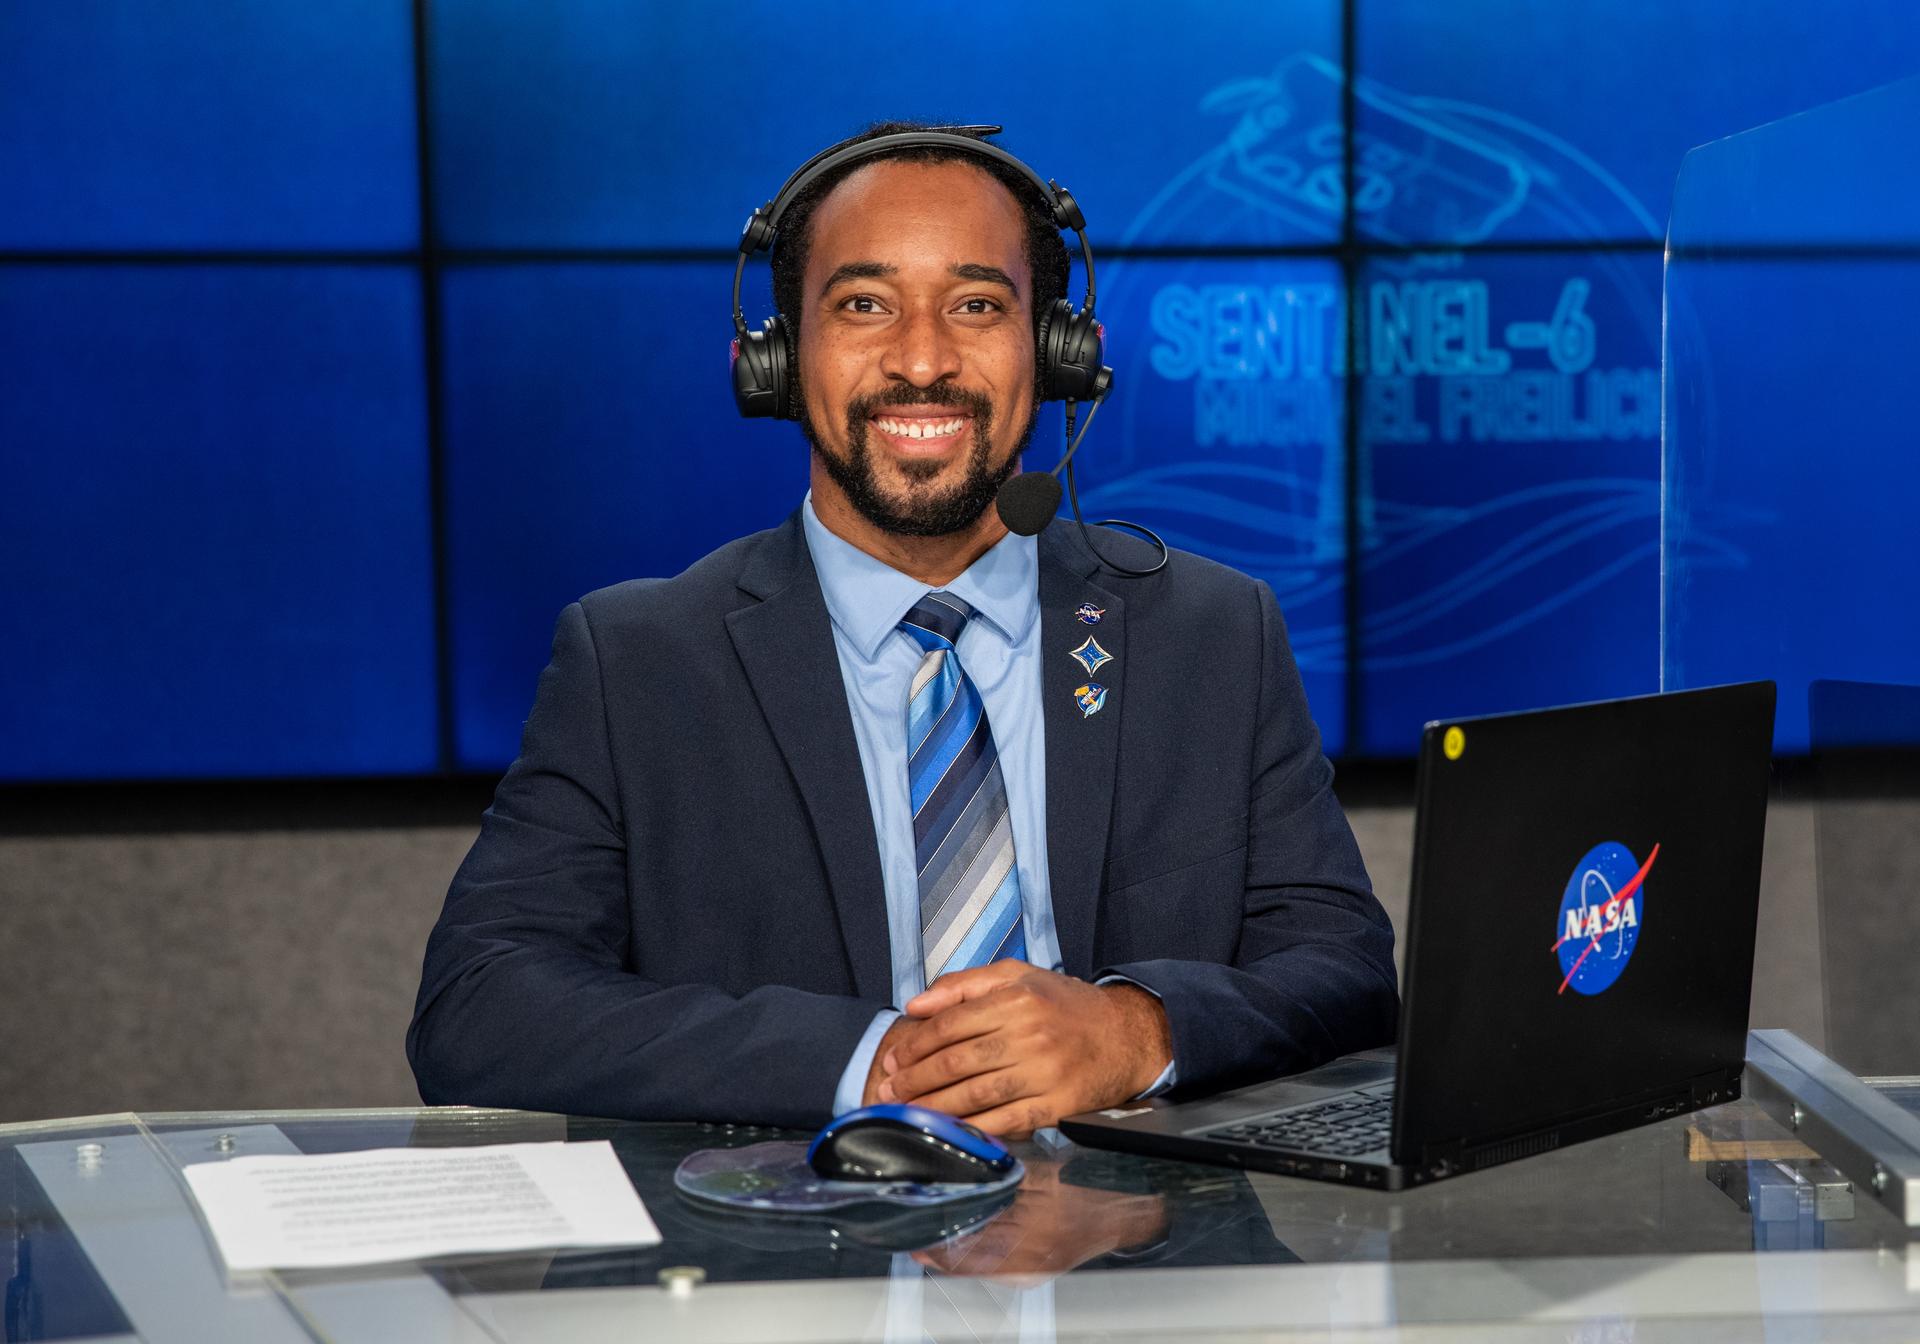 Portrait of Phillip Hargrove wearing a headset as he takes part in coverage for the Sentinel 6 launch